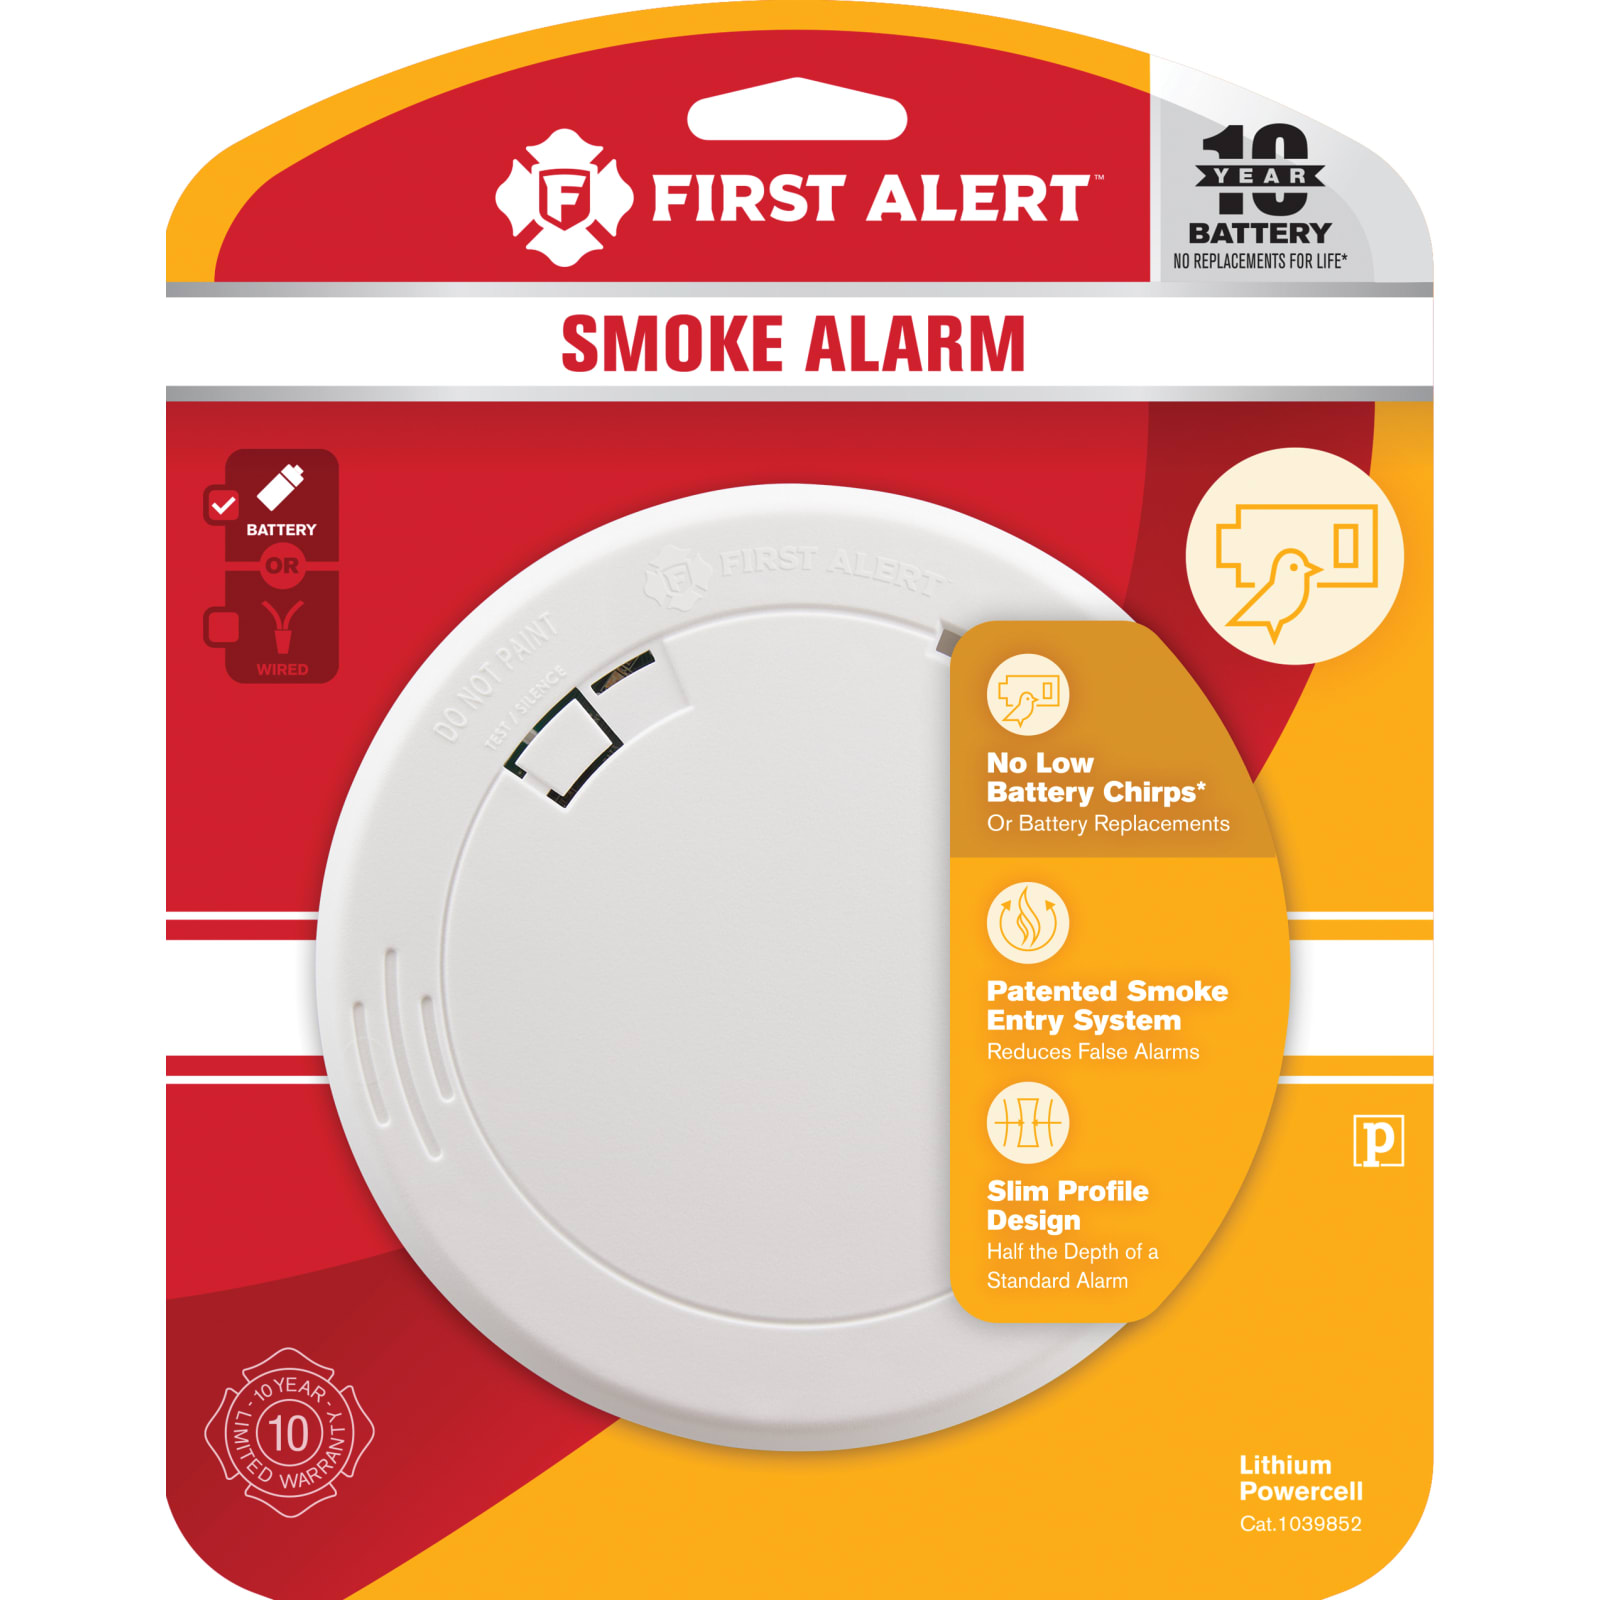 10-year Compact Round Smoke Alarm by First Alert at Fleet Farm